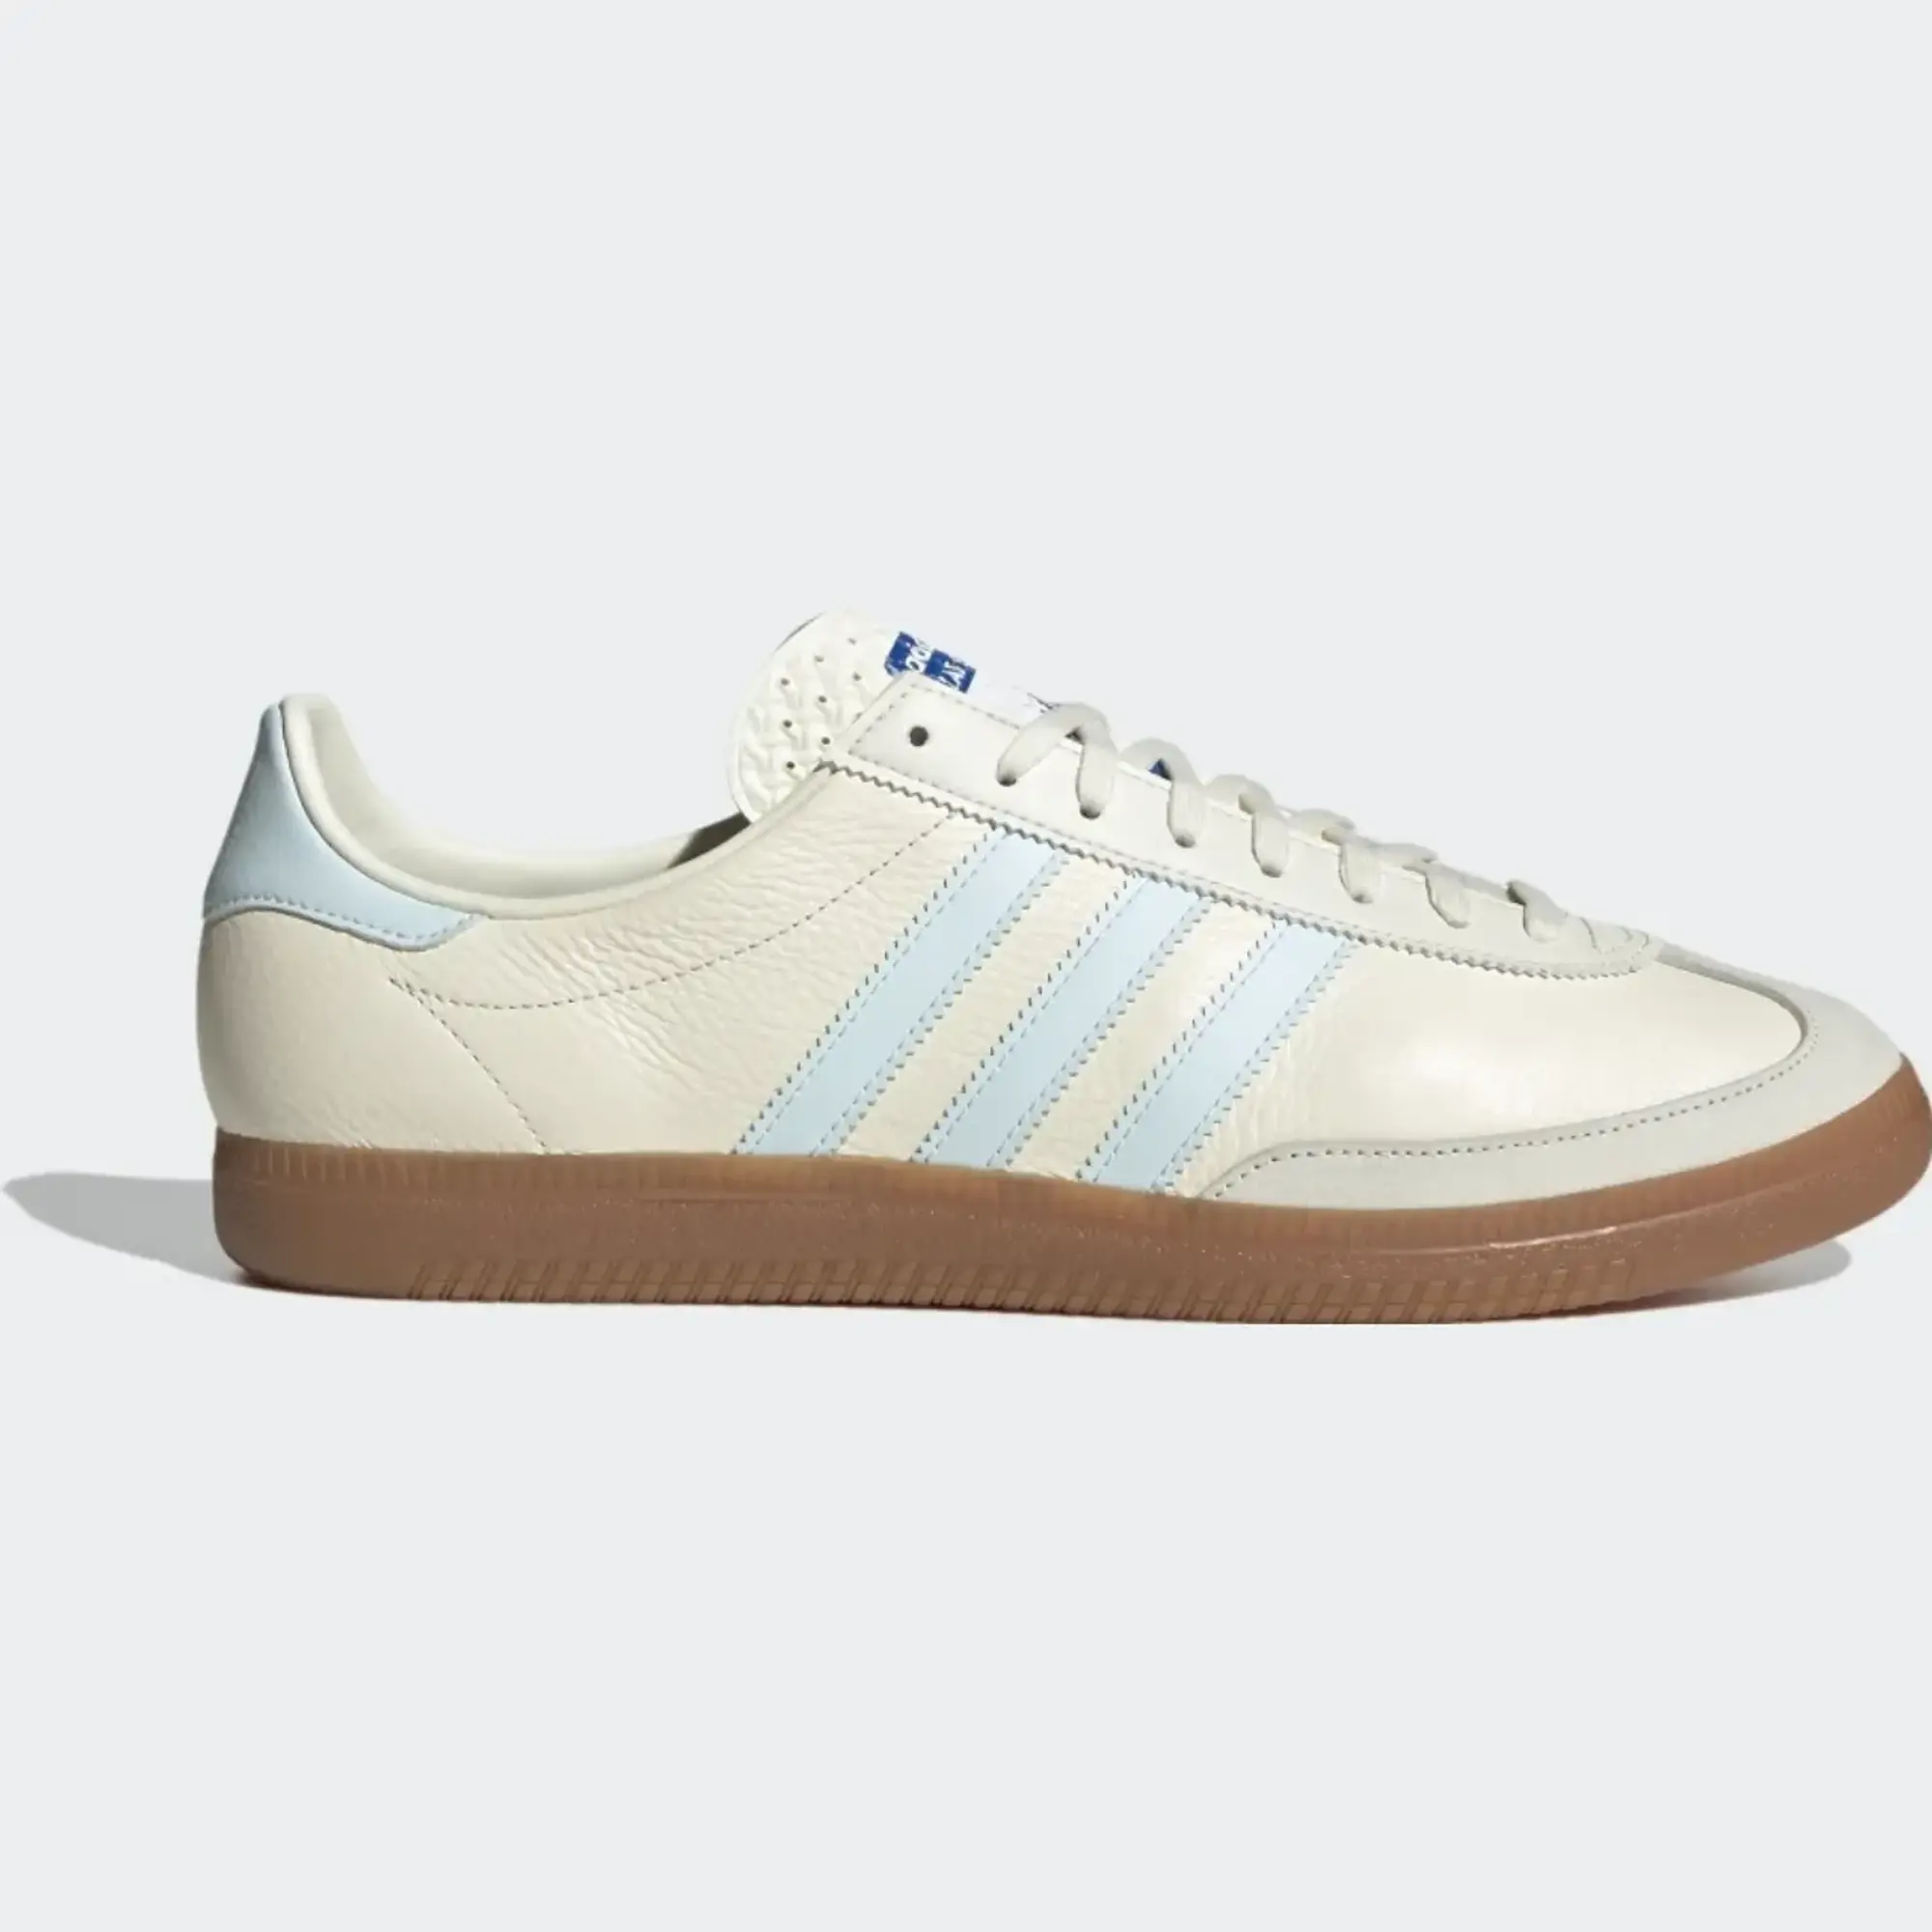 Adidas Last Frontier Trainers Cream White Almost Blue,White